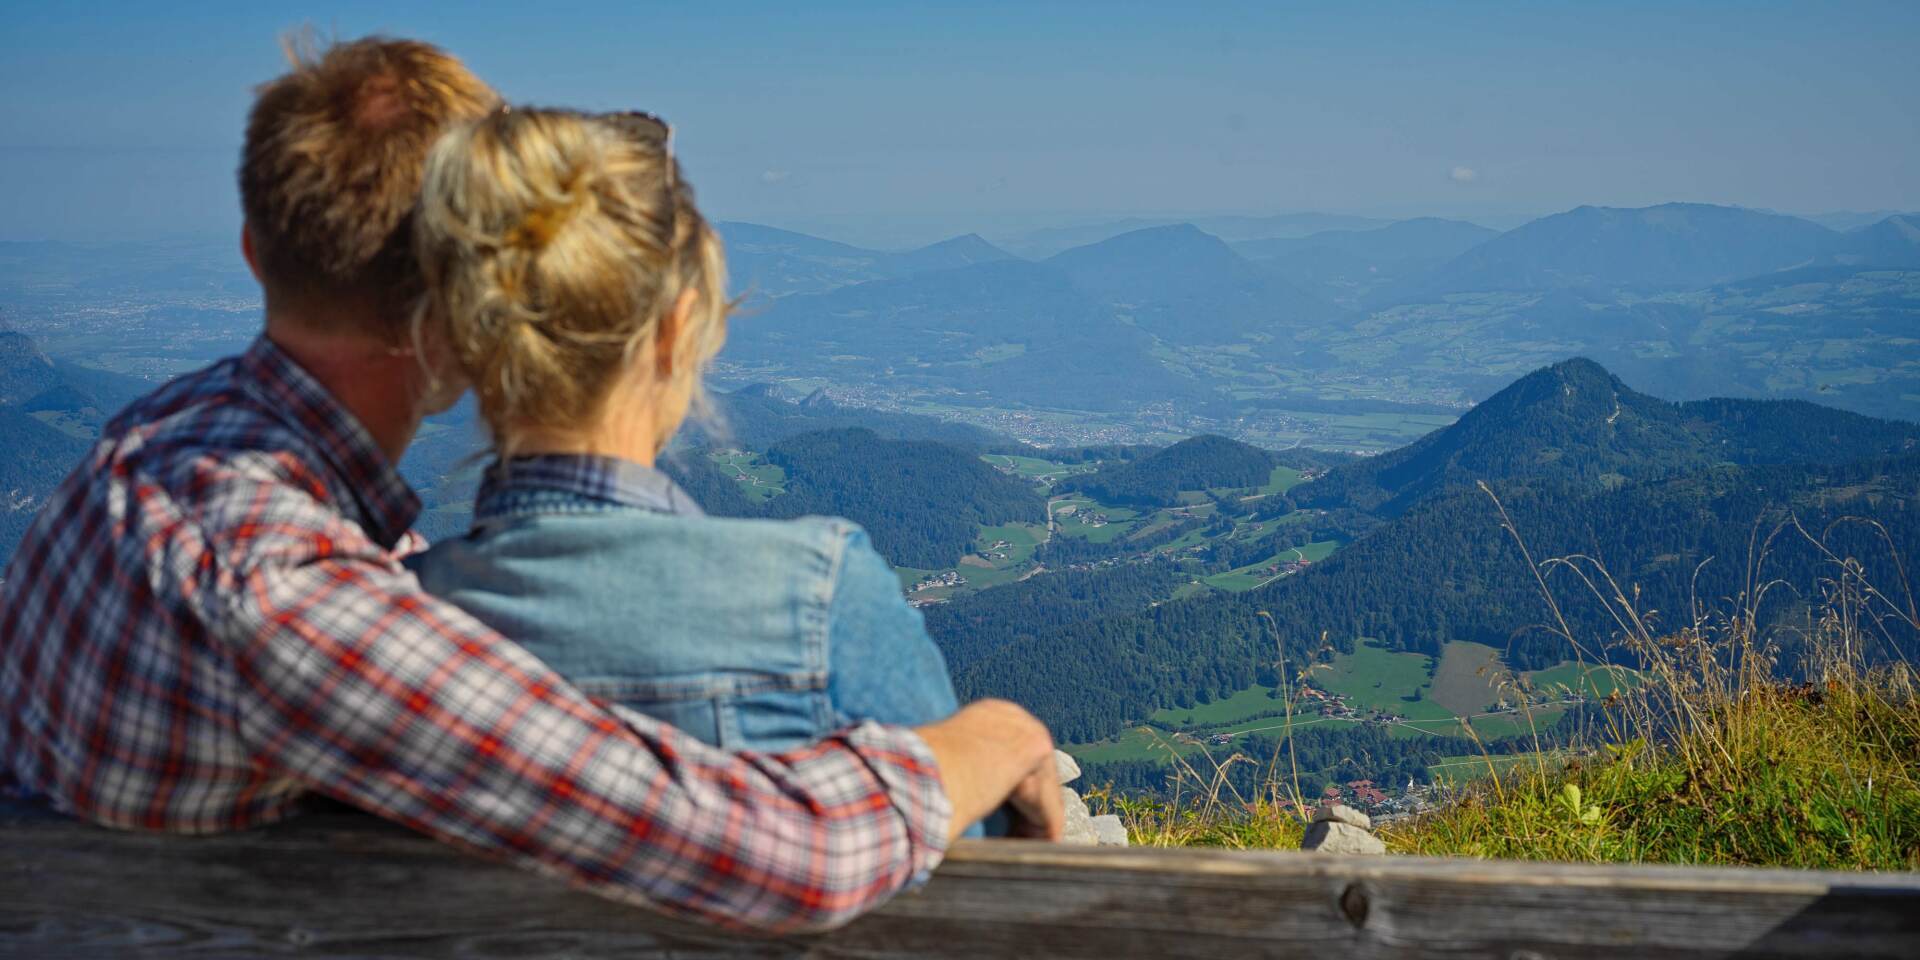 Eagles Nest Berchtesgaden - Couple sitting on a bench and enjoying the view over the Bavarian Alps - Eagle's Nest Tour by Salzburg Panorama Tours